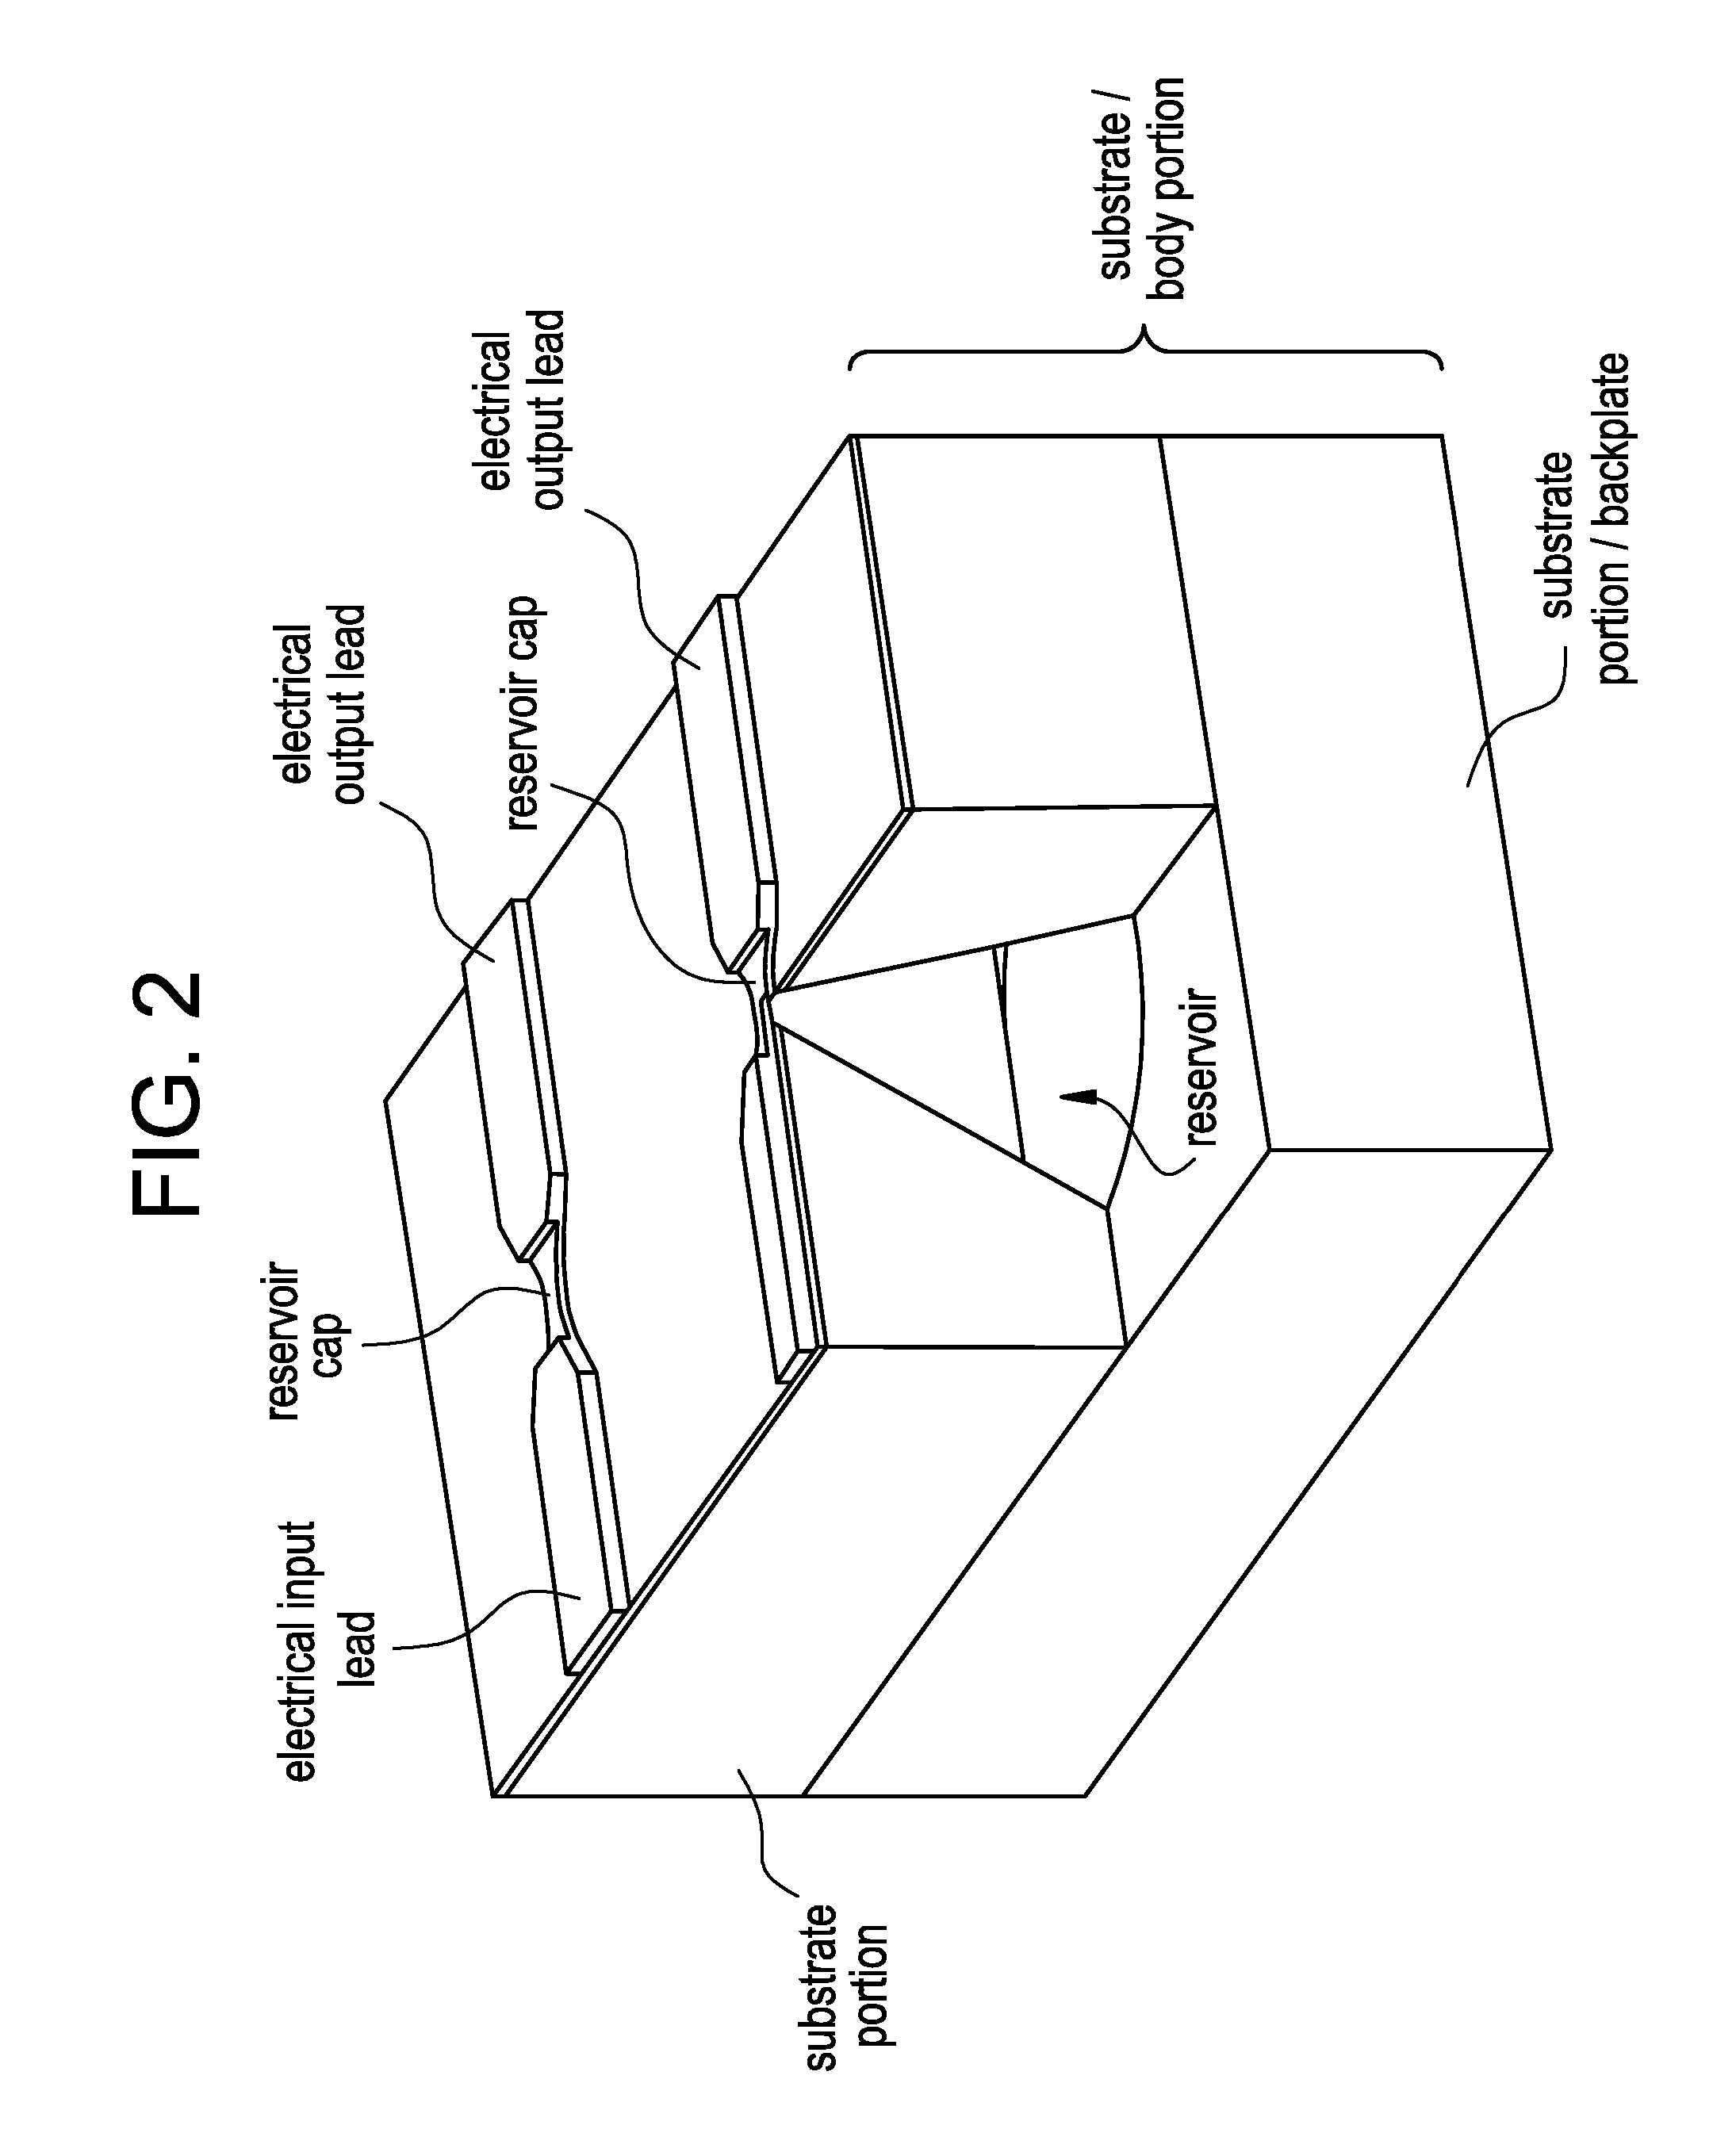 Method and implantable device with reservoir array for pre-clinical in vivo testing